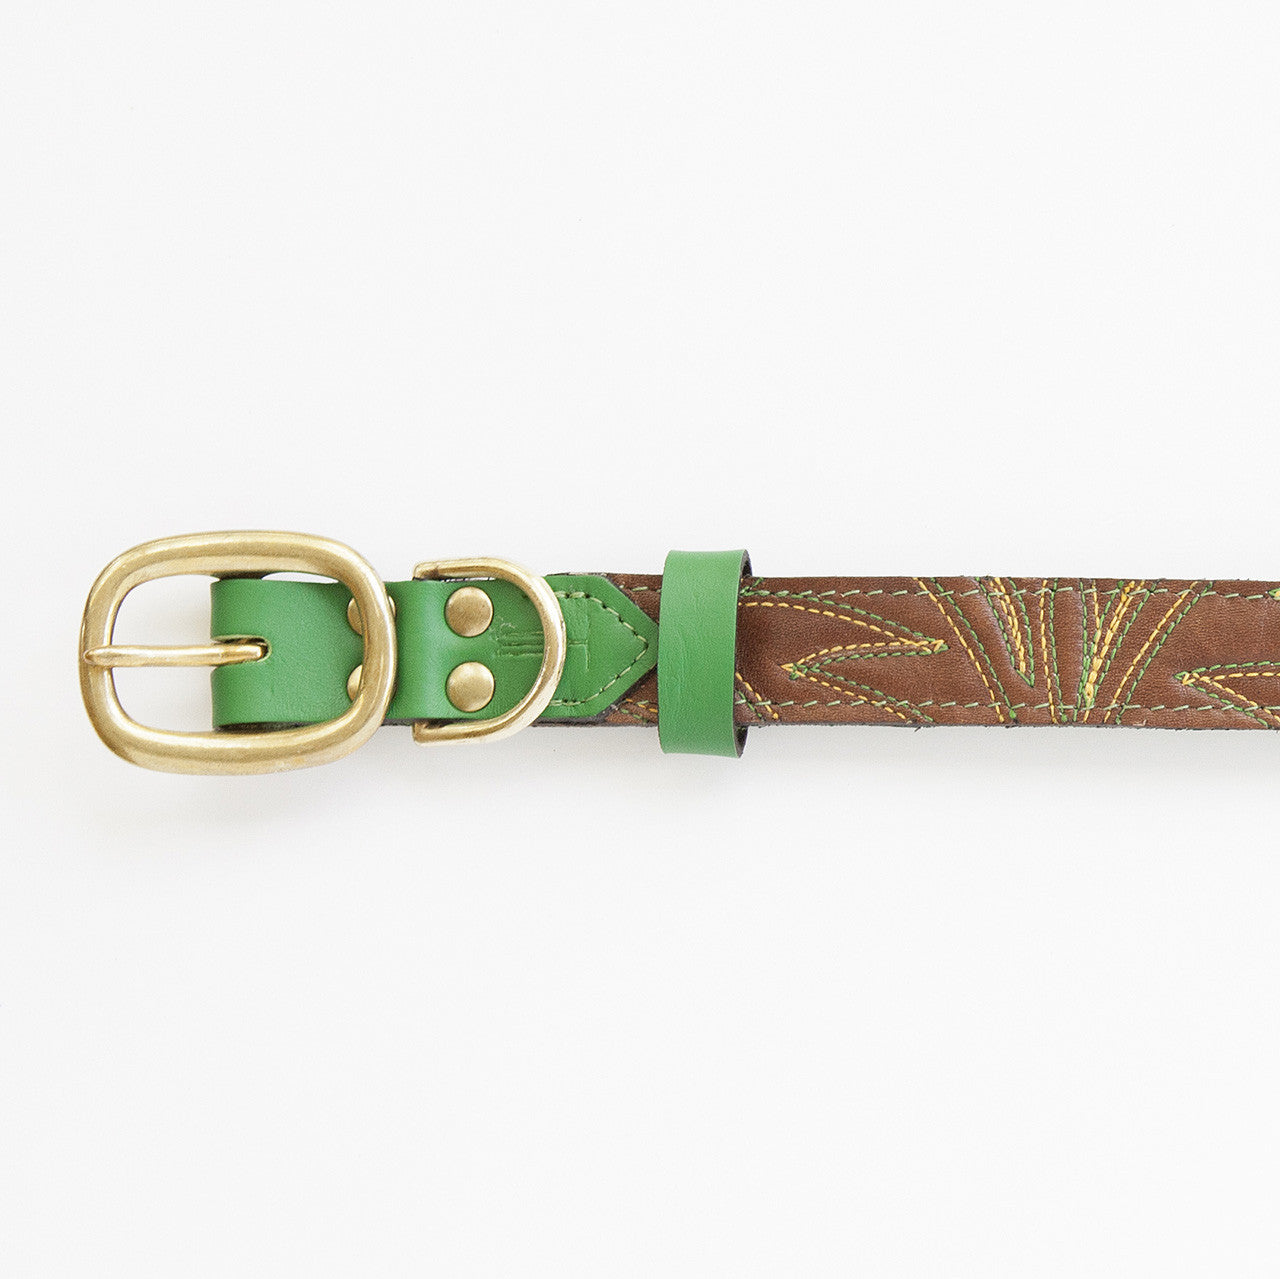 Emerald Green Dog Collar with Chocolate Leather + Green and Yellow Spike Stitching (buckle)